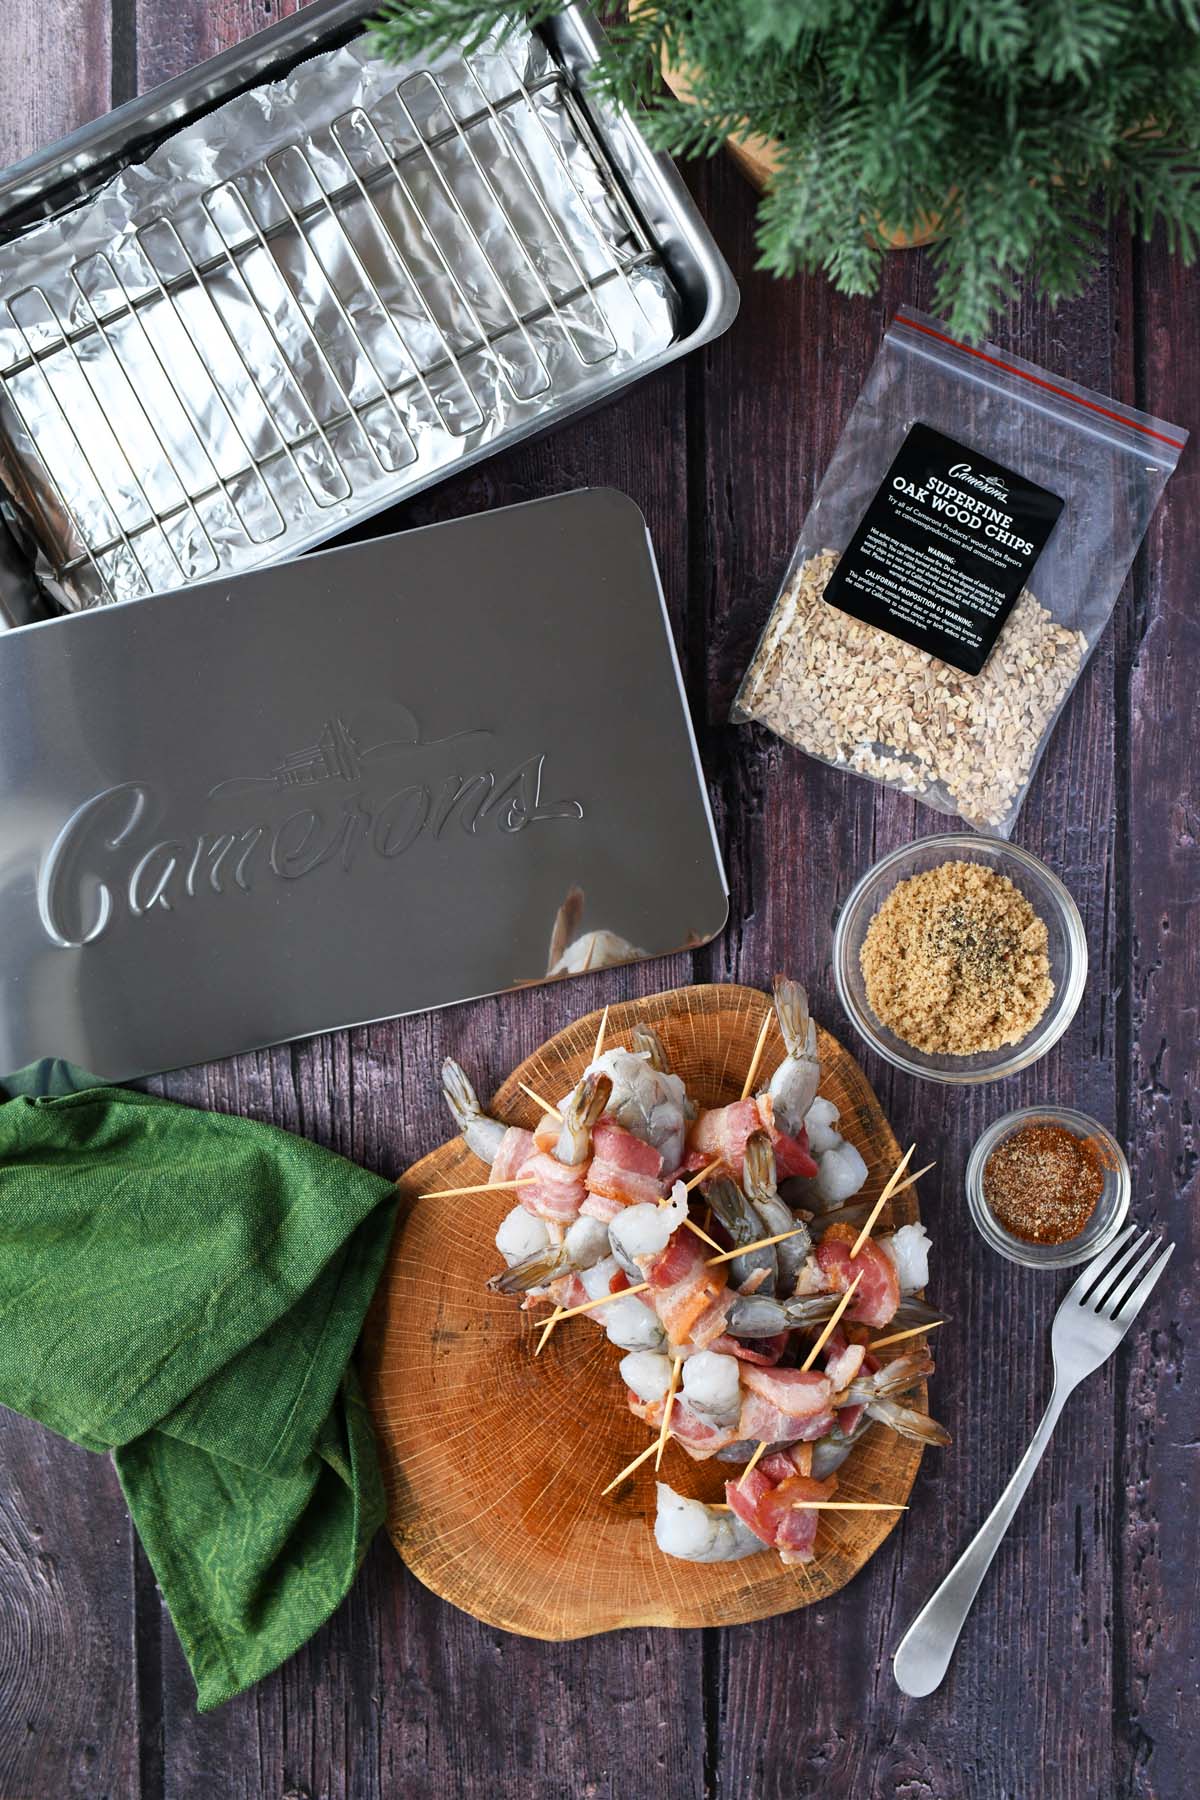 A silver smoker, and raw bacon-wrapped shrimp on a wooden table with a green napkin.